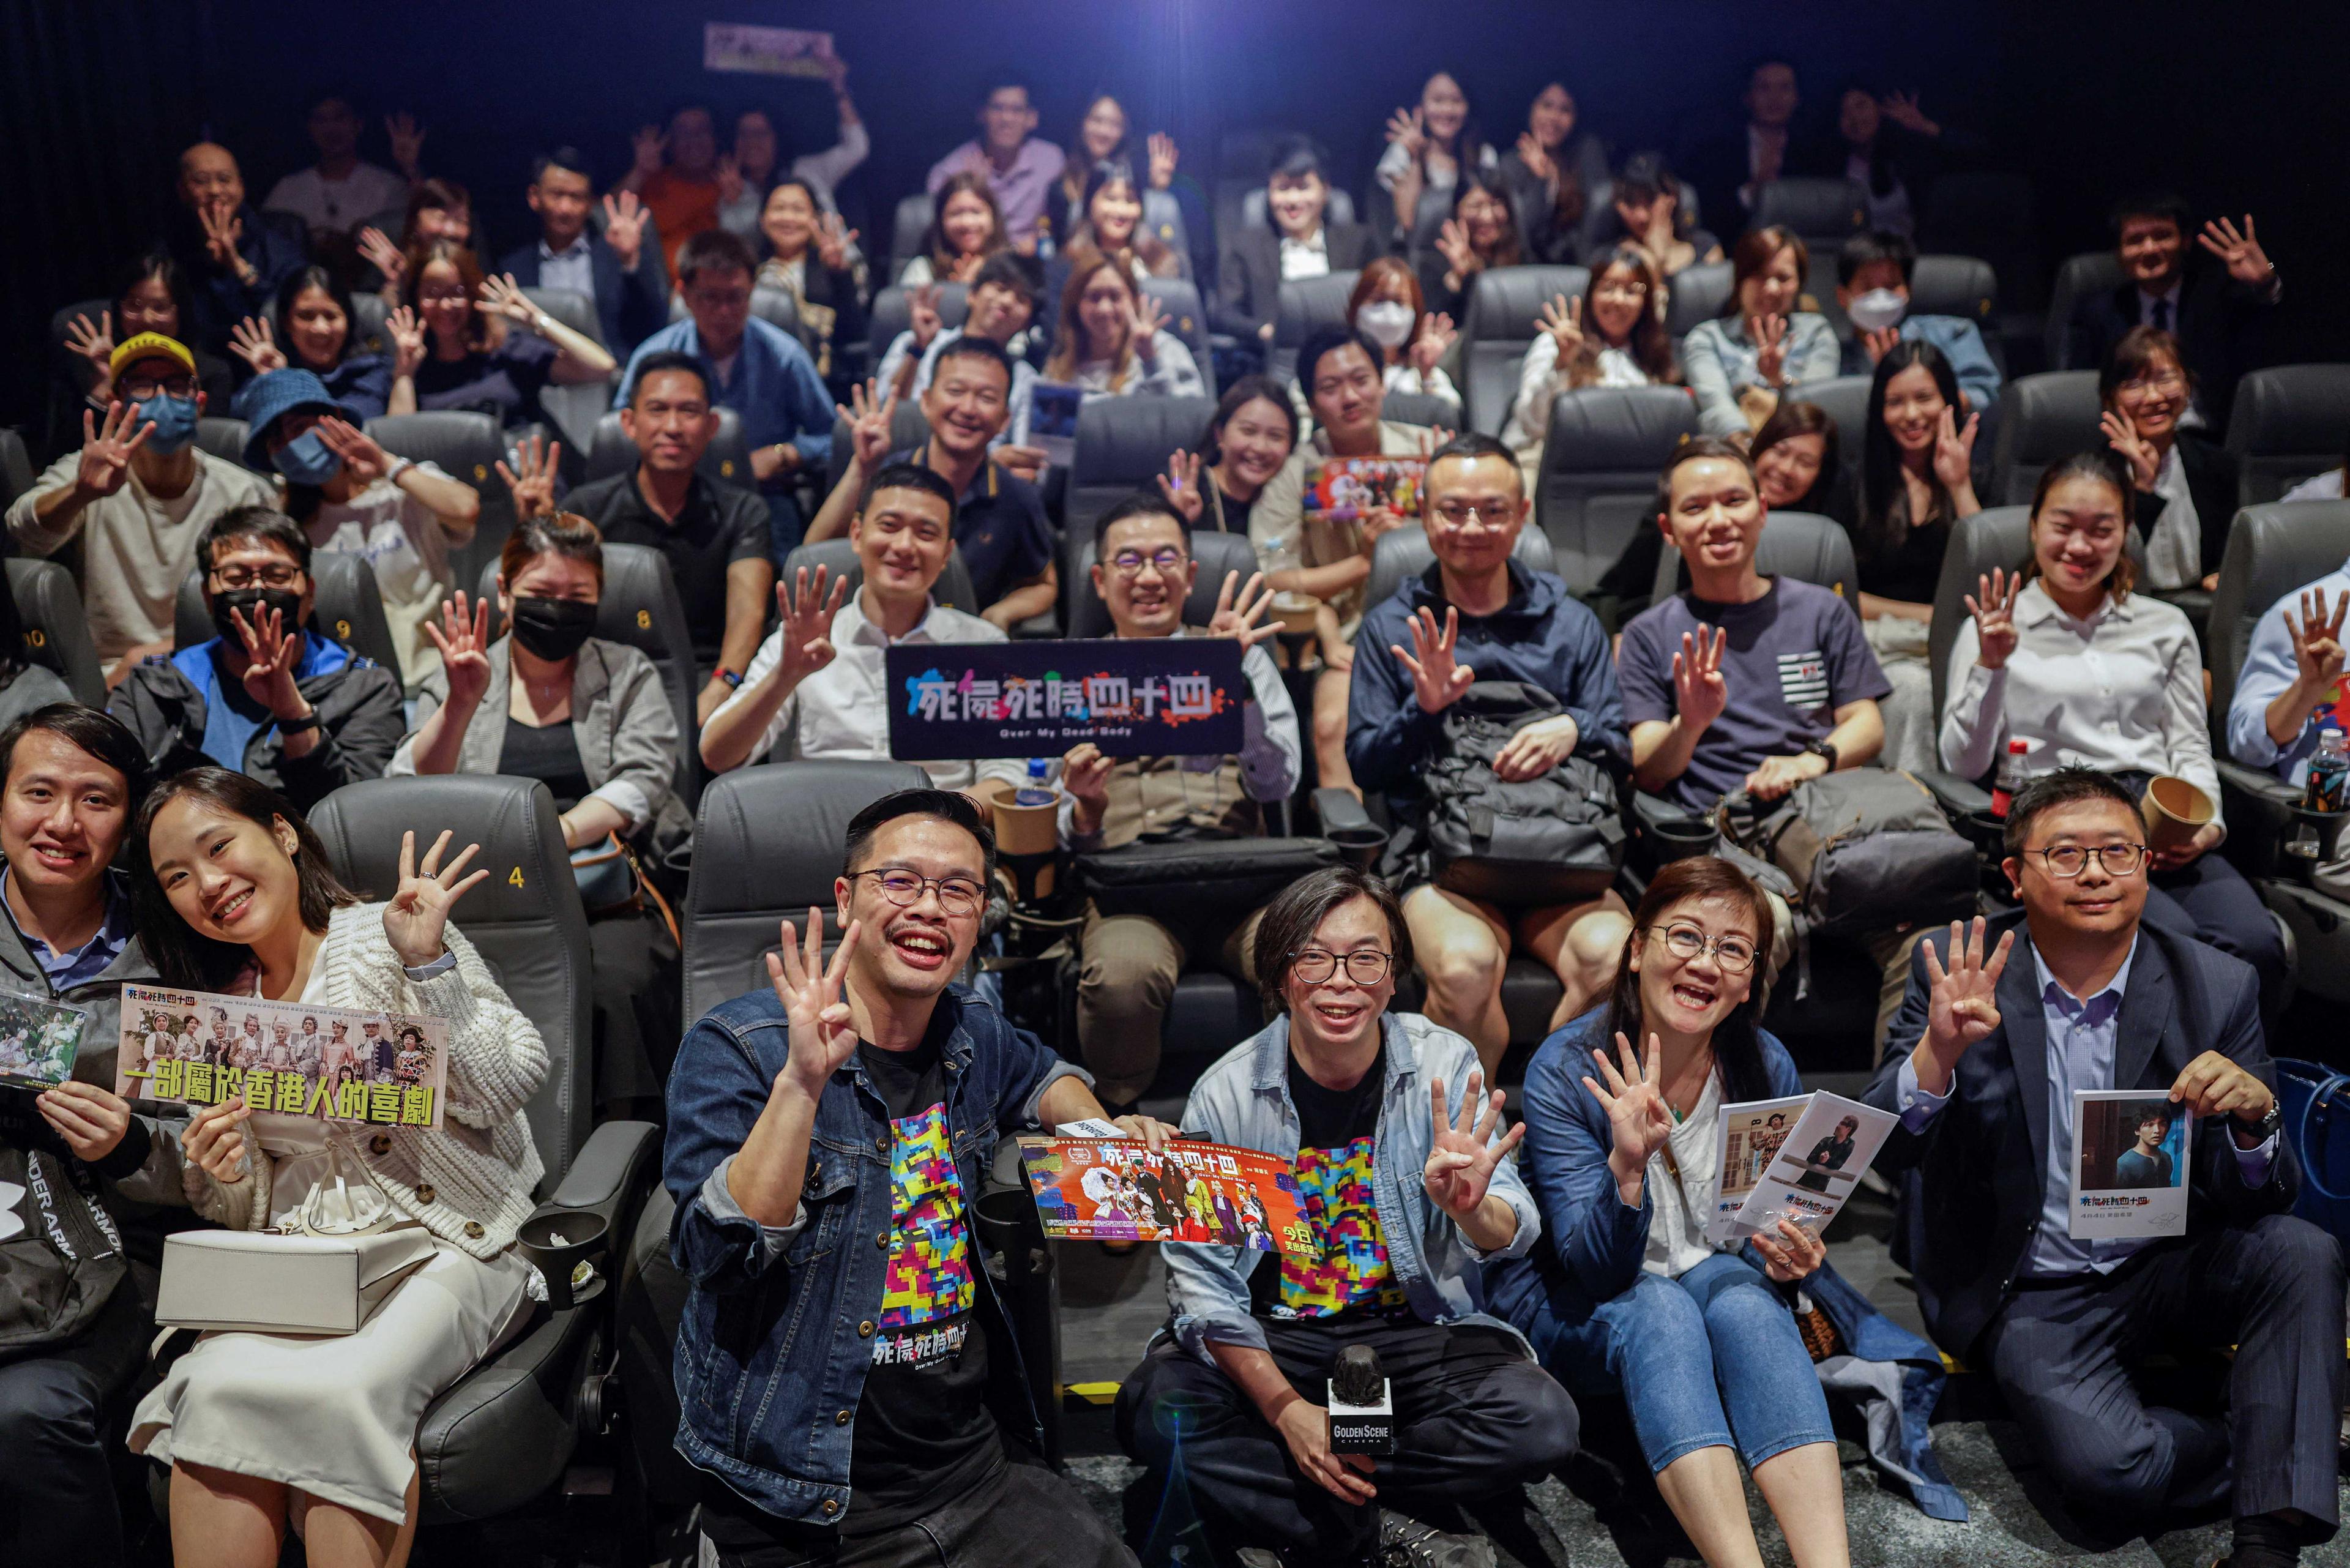 Director Ho Cheuk-Tin and actor Yeung Wai Lun pose with audience after a private screening of Ho's movie 'Over My Dead Body' in Hong Kong, China, May 2. Photo: Reuters